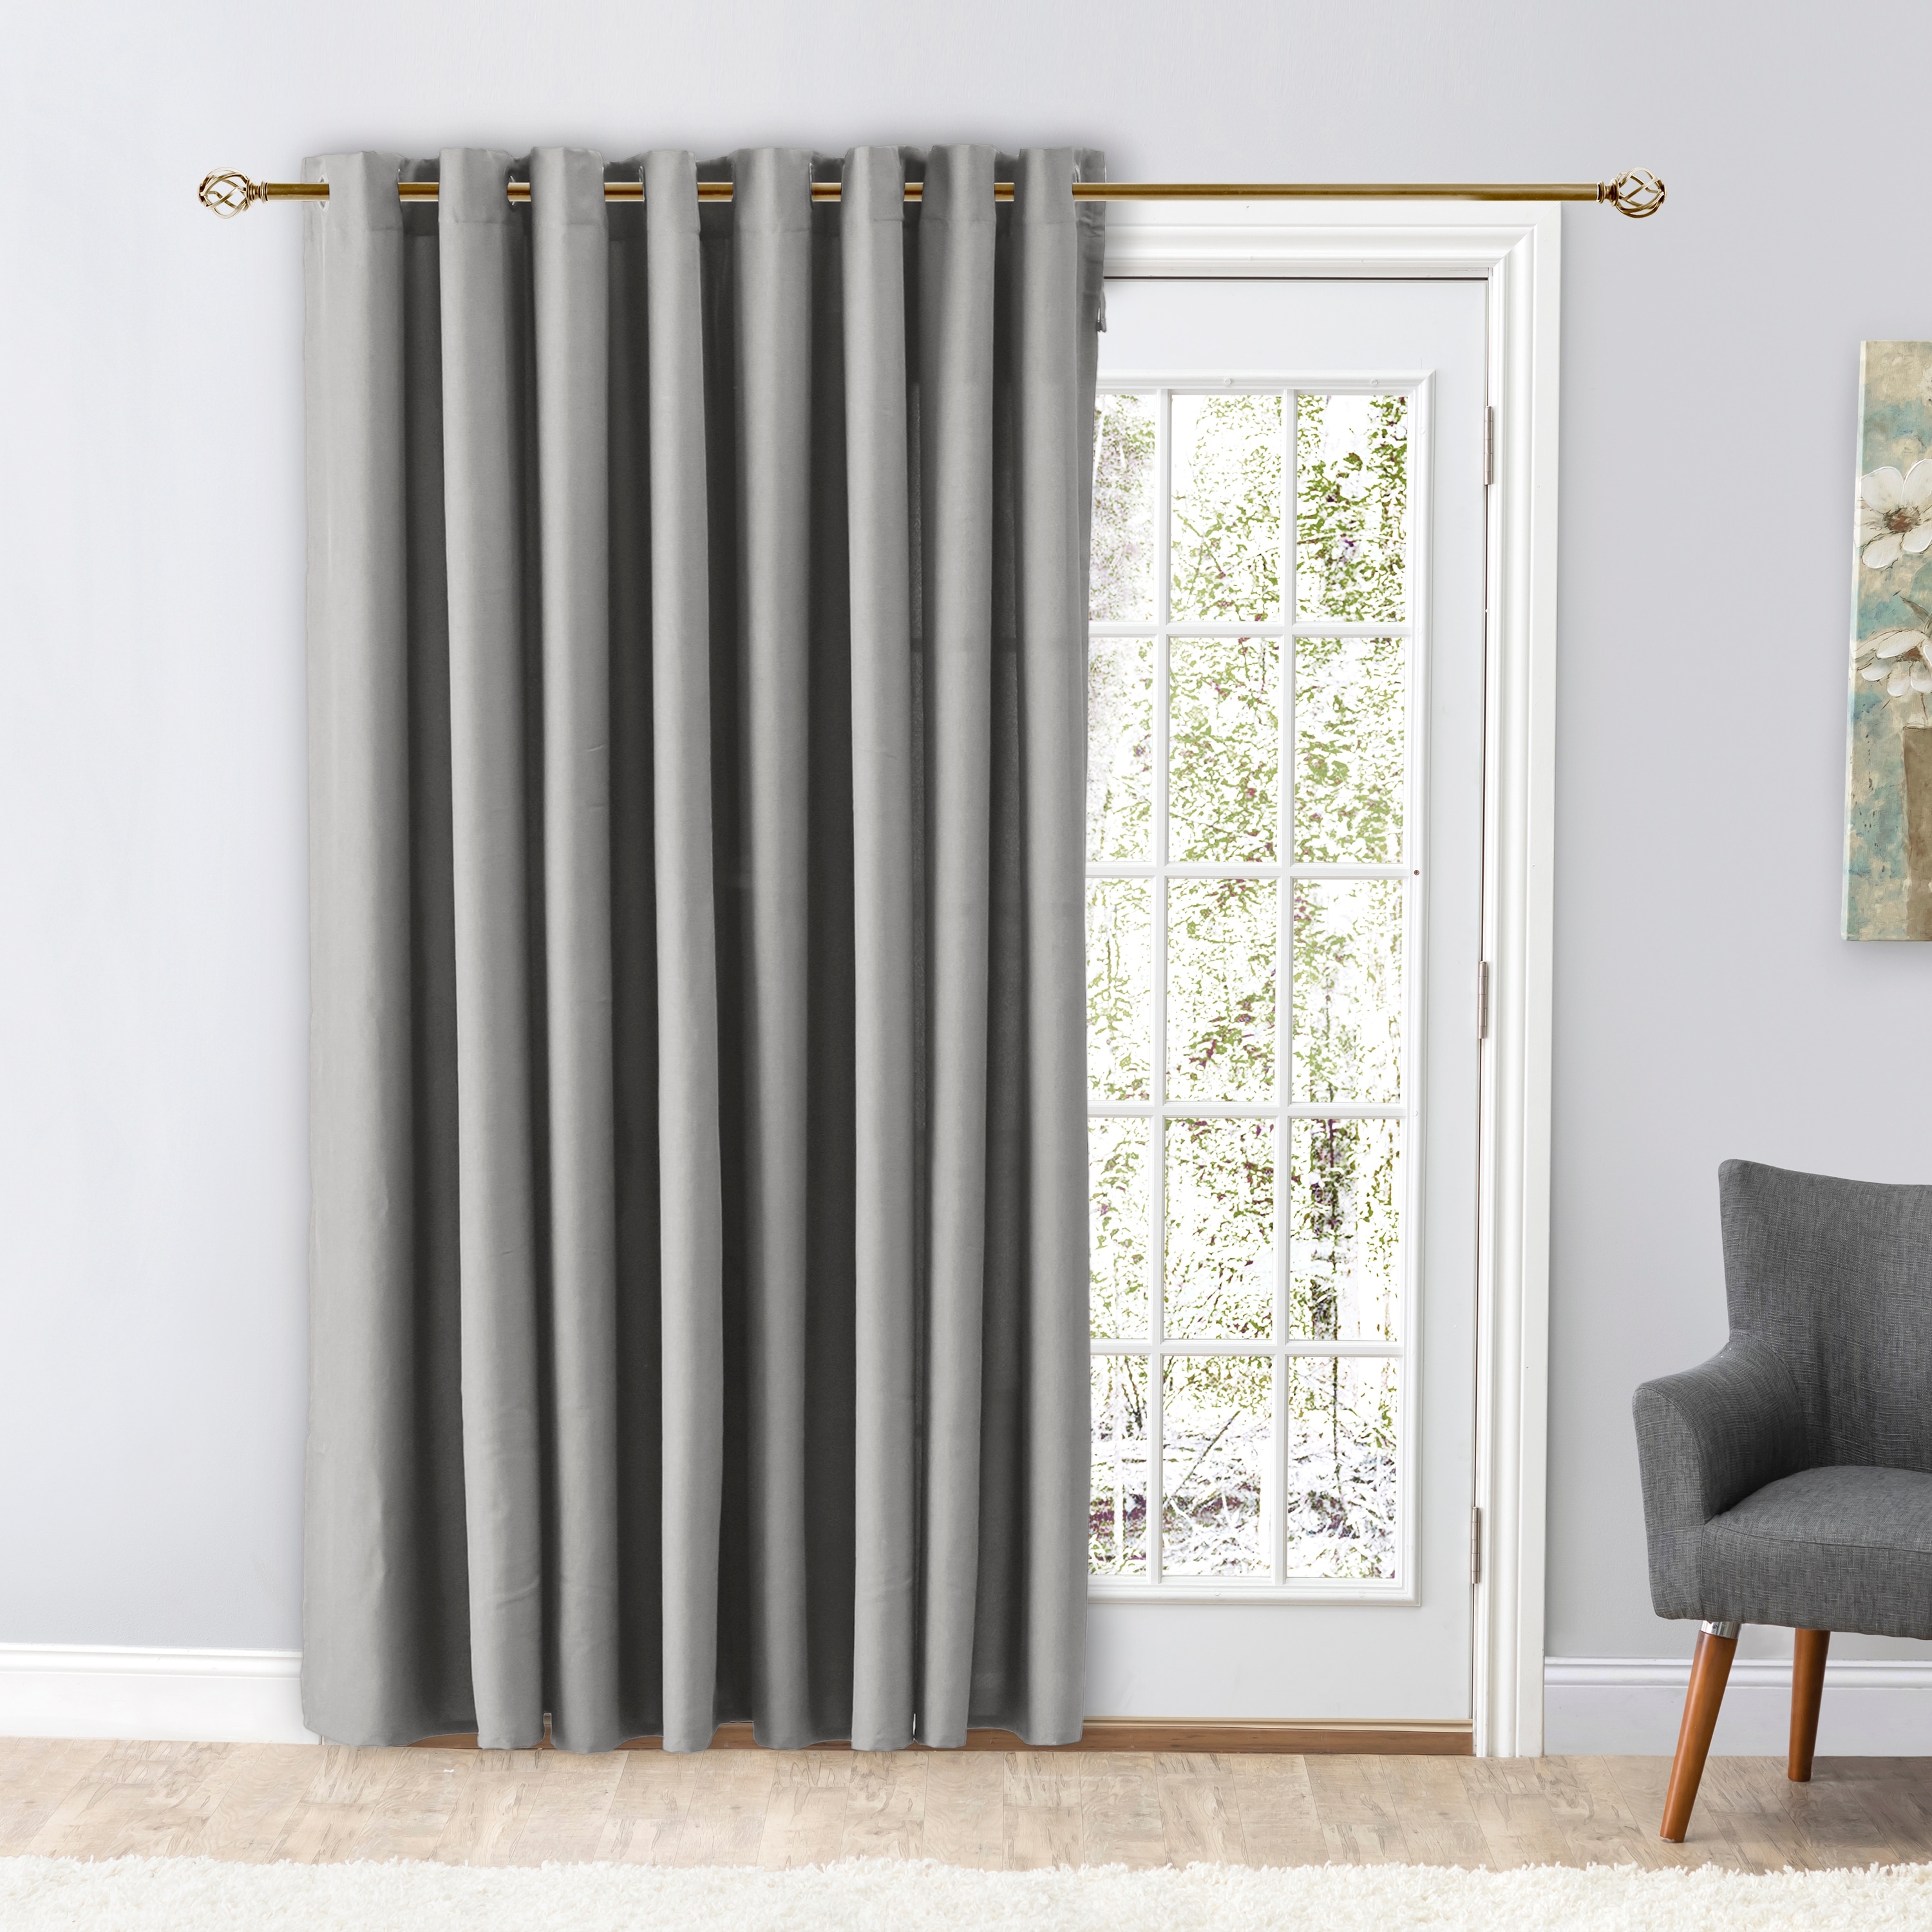 Copper Grove Golestan Extra Wide Curtain Panel 112 x 84 112 x 84 112  x 84 On Sale Bed Bath  Beyond 21258404